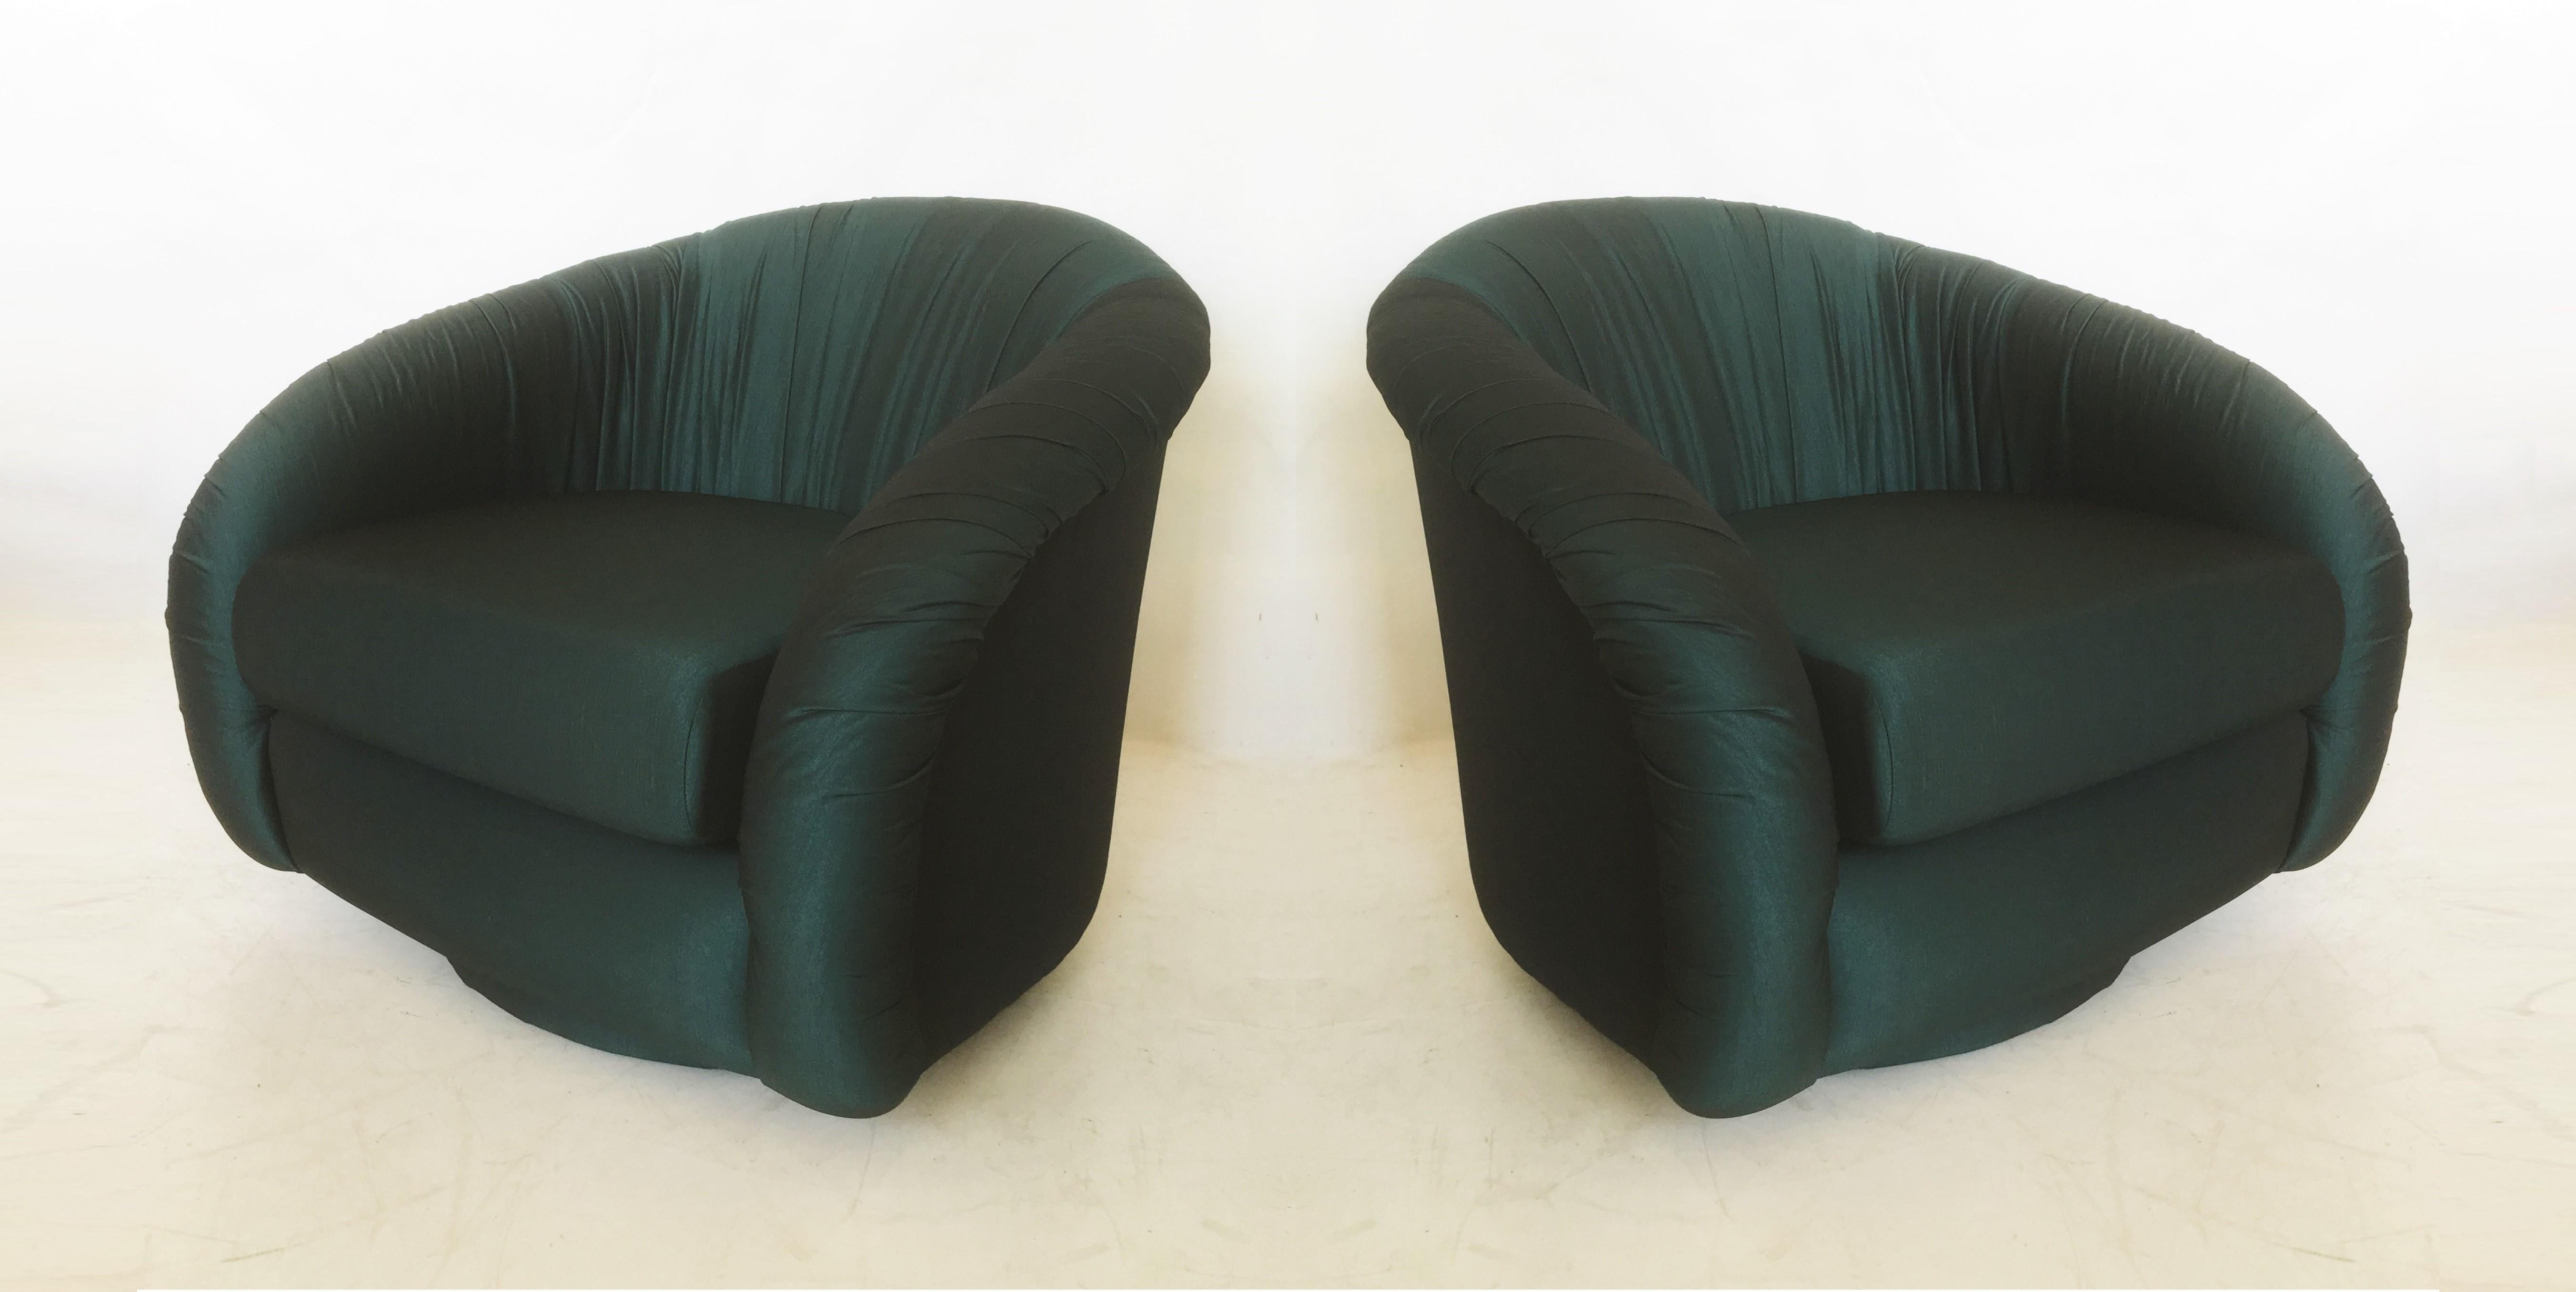 American Pair of Mid-century Swivel Chairs in the style of Milo Baughman for Directional For Sale